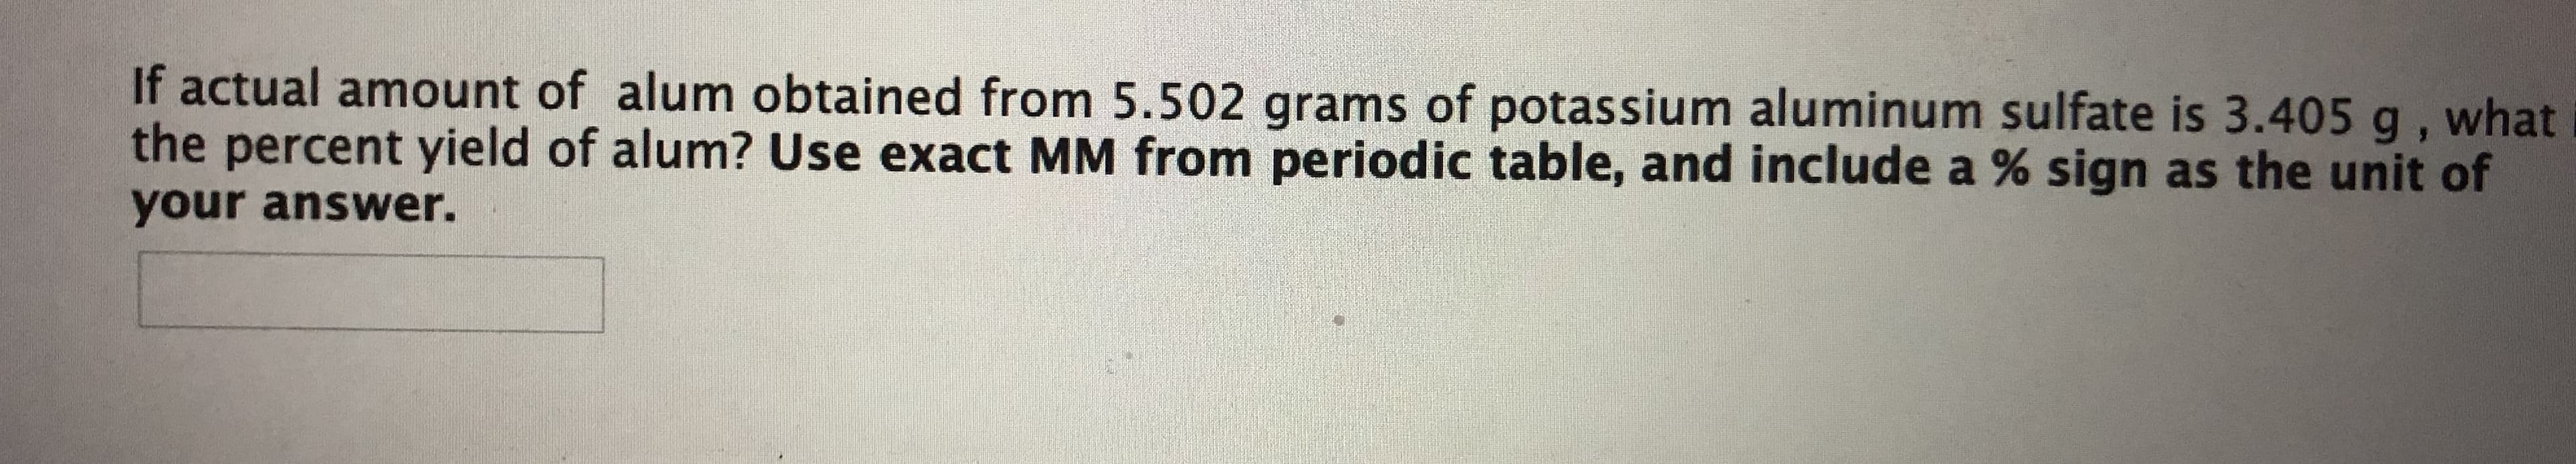 If actual amount of alum obtained from 5.502 grams of potassium aluminum sulfate is 3.405 g , what
the percent yield of alum? Use exact MM from periodic table, and include a % sign as the unit of
your answer.
